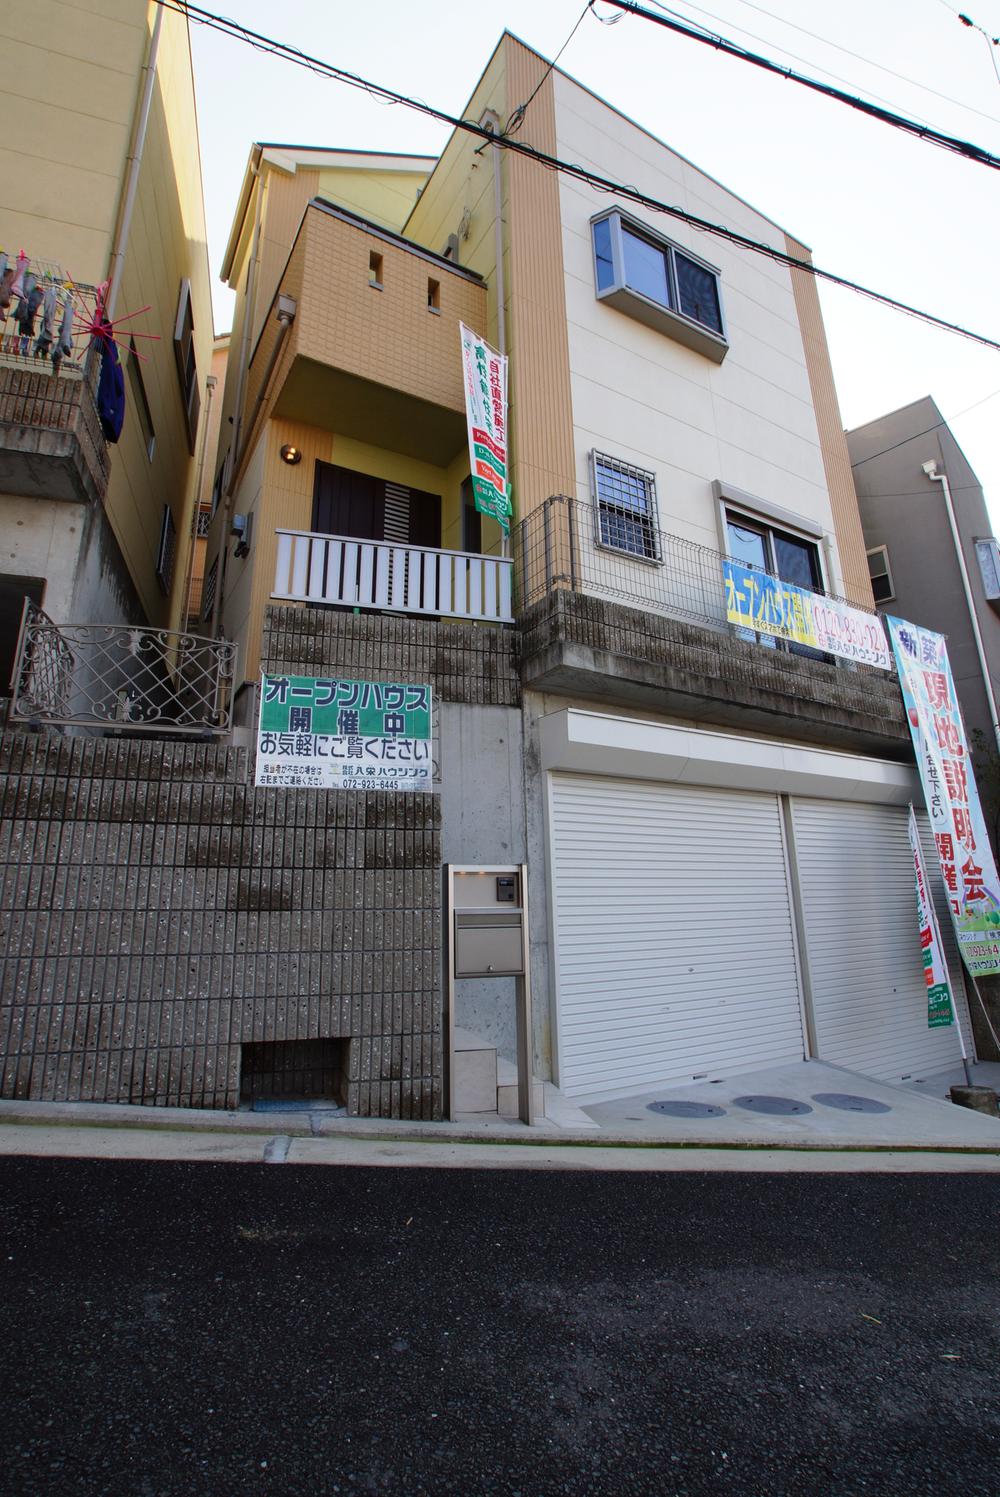 Local appearance photo. Model house "No. 7 land" two underground garage